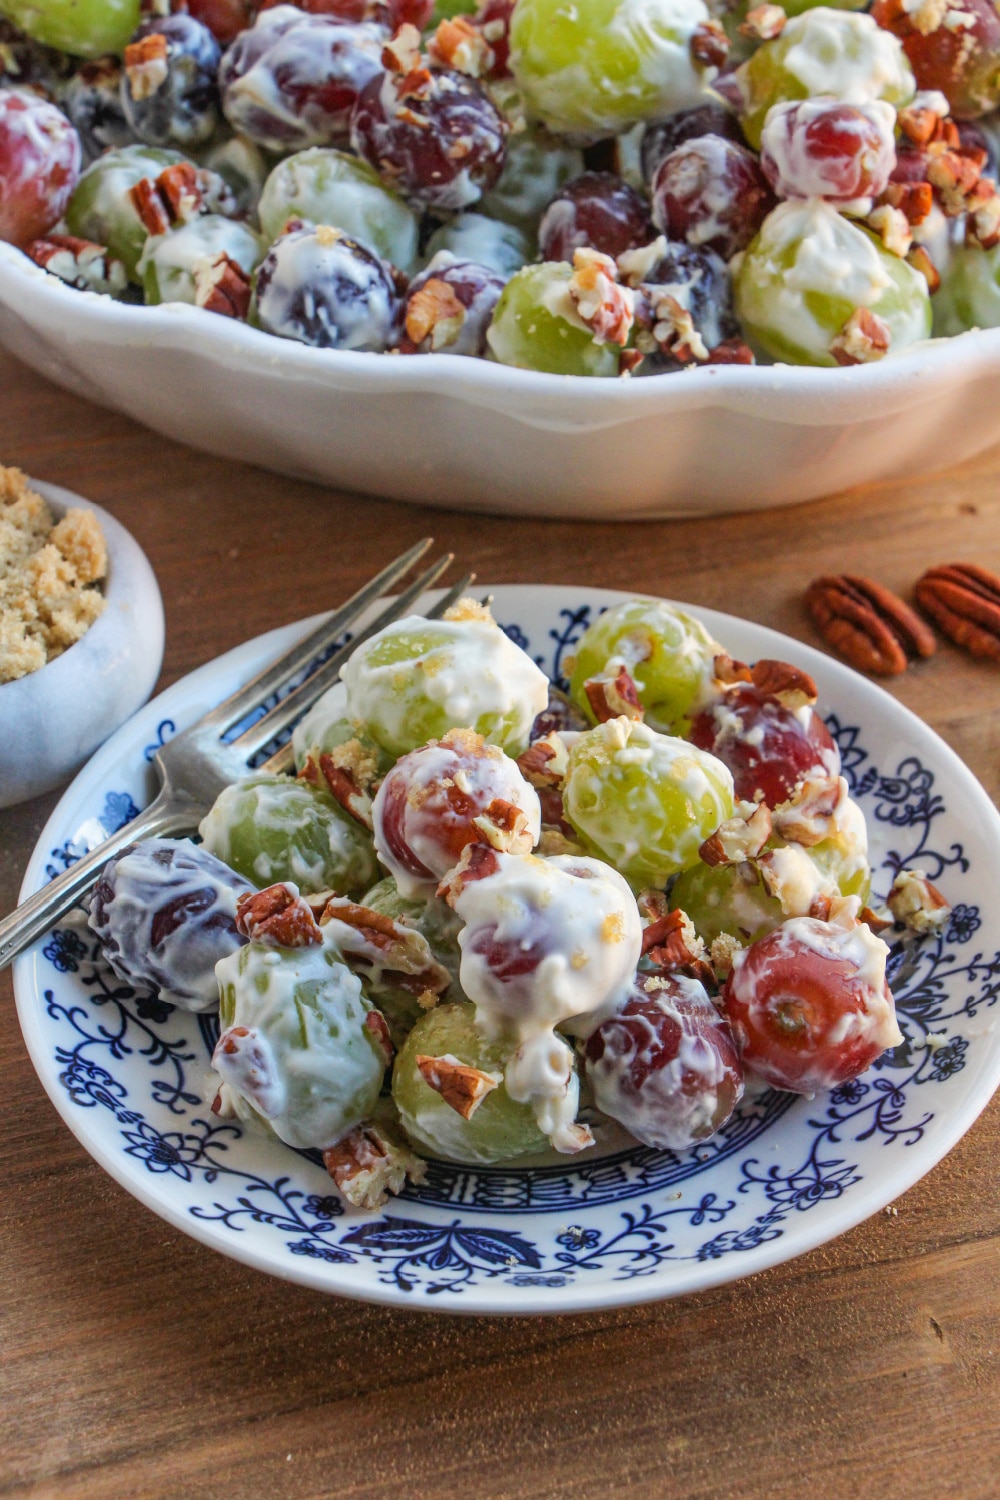 A single serving of Grape Salad on a blue and white plate sits in front of a white serving bowl of the same salad.